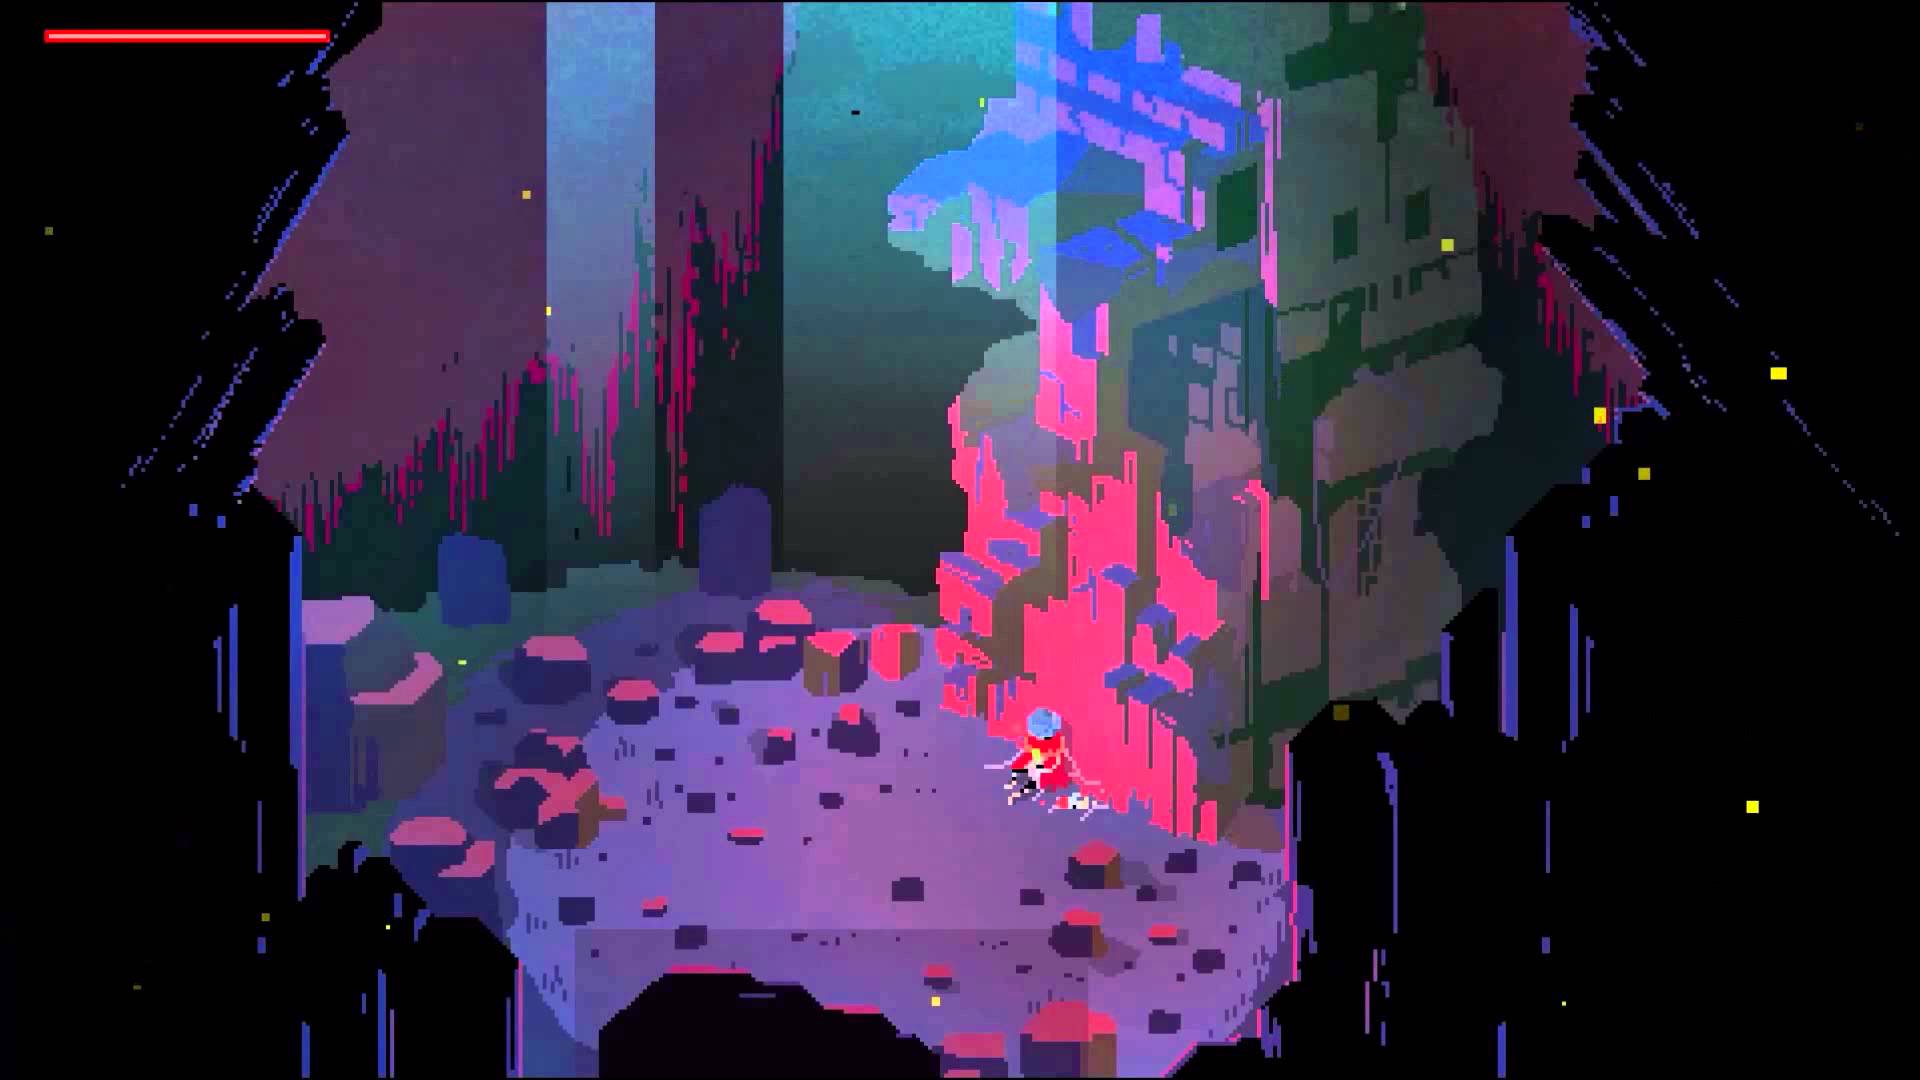 Sige sej Pjece Hyper Light Drifter Review 2023: Overview, Storyline, Pros, Cons, And More